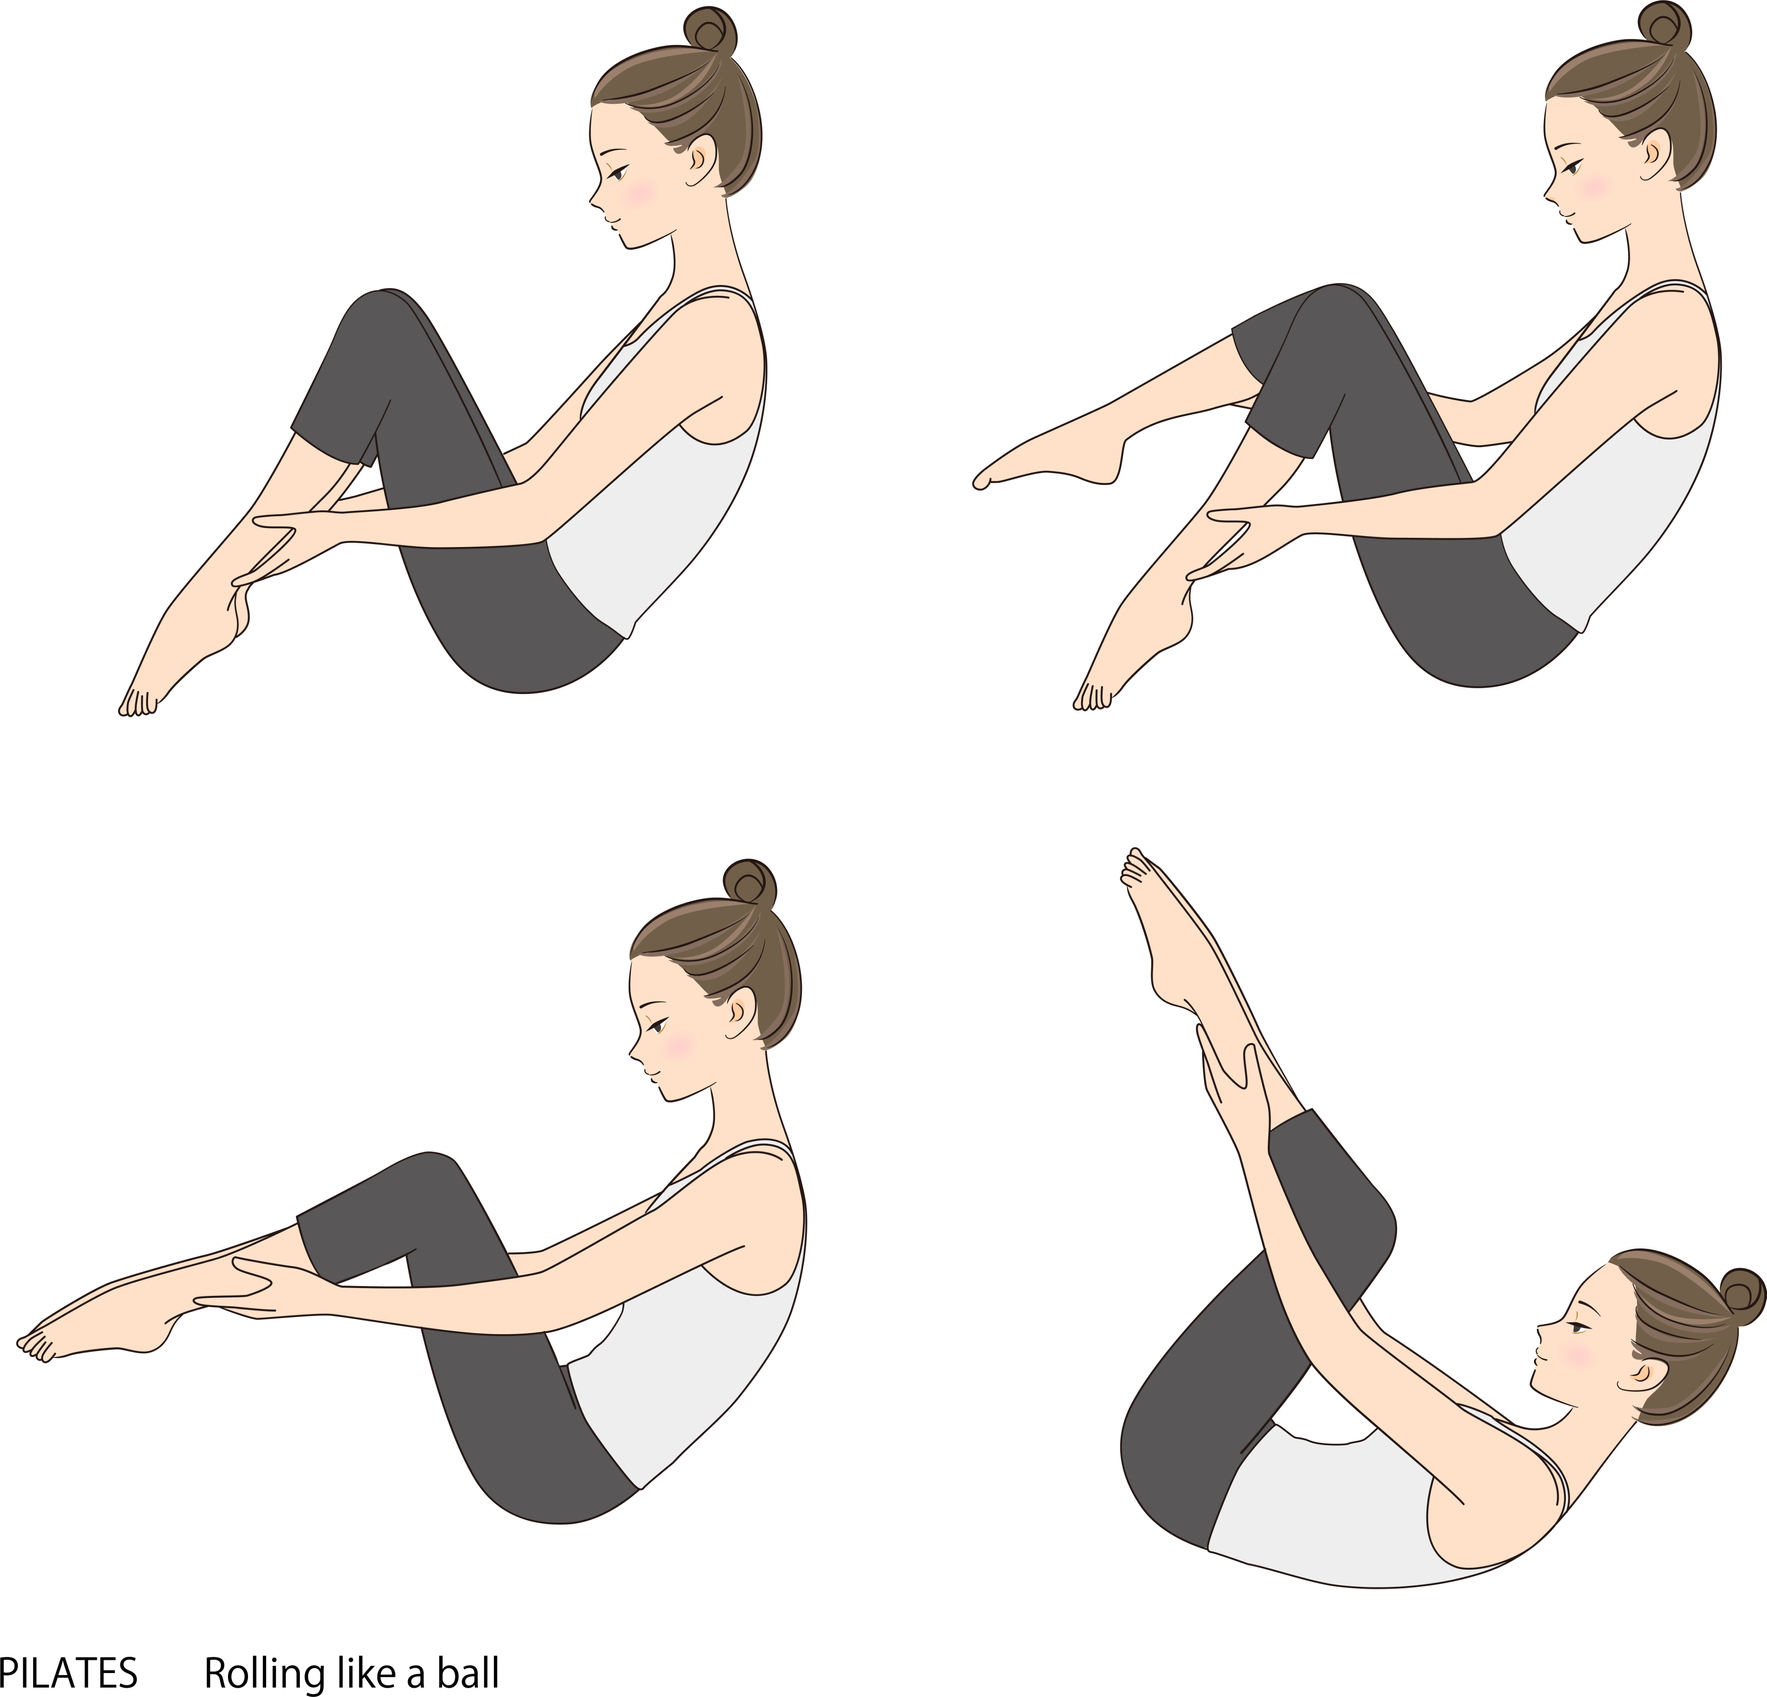 Pilates sequence, rolling-like a ball